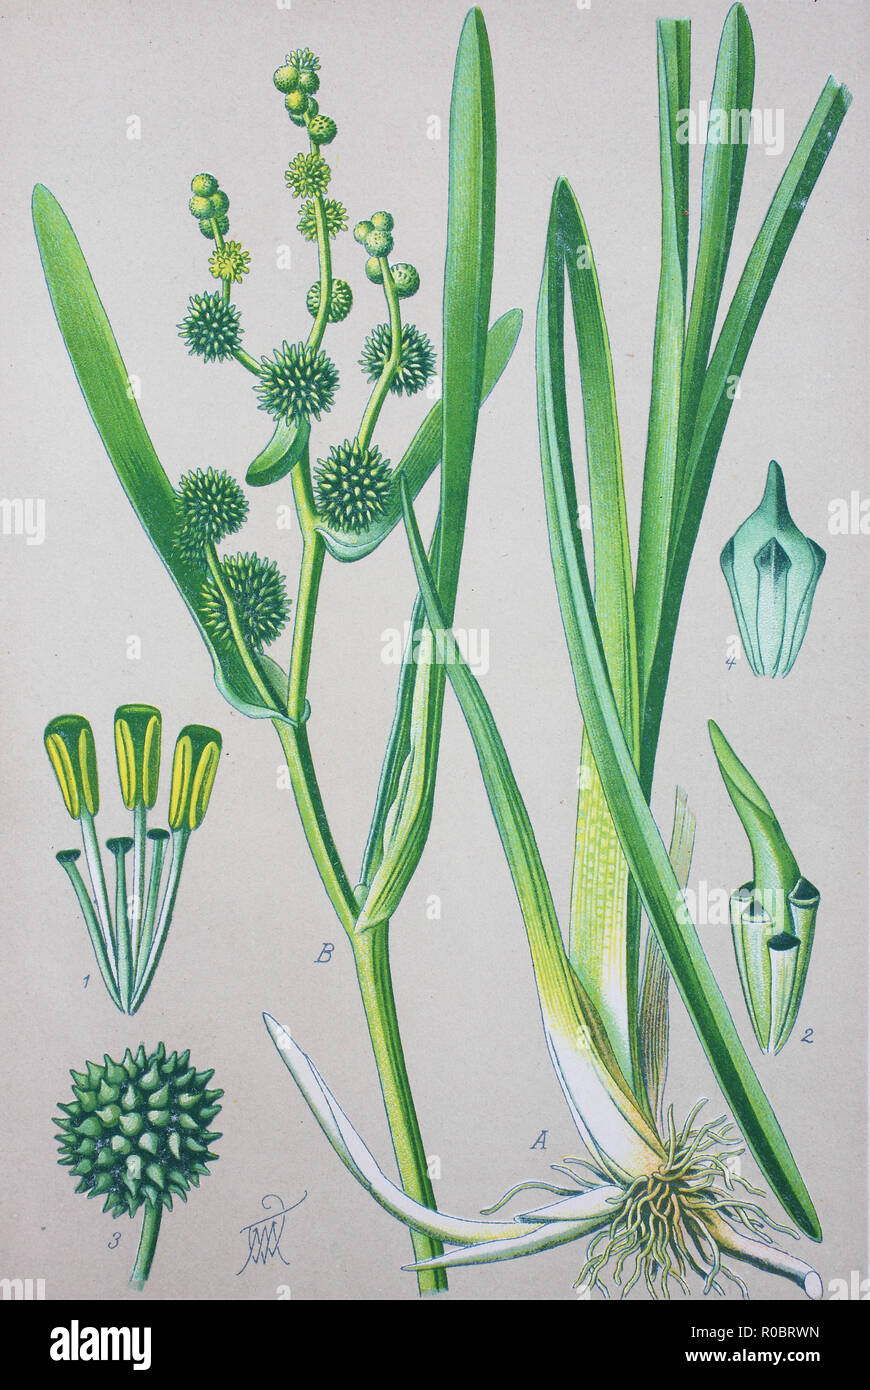 Digital improved high quality reproduction: Sparganium erectum, the simplestem bur-reed or branched bur-reed, is a perennial plant species in the genus Sparganium Stock Photo